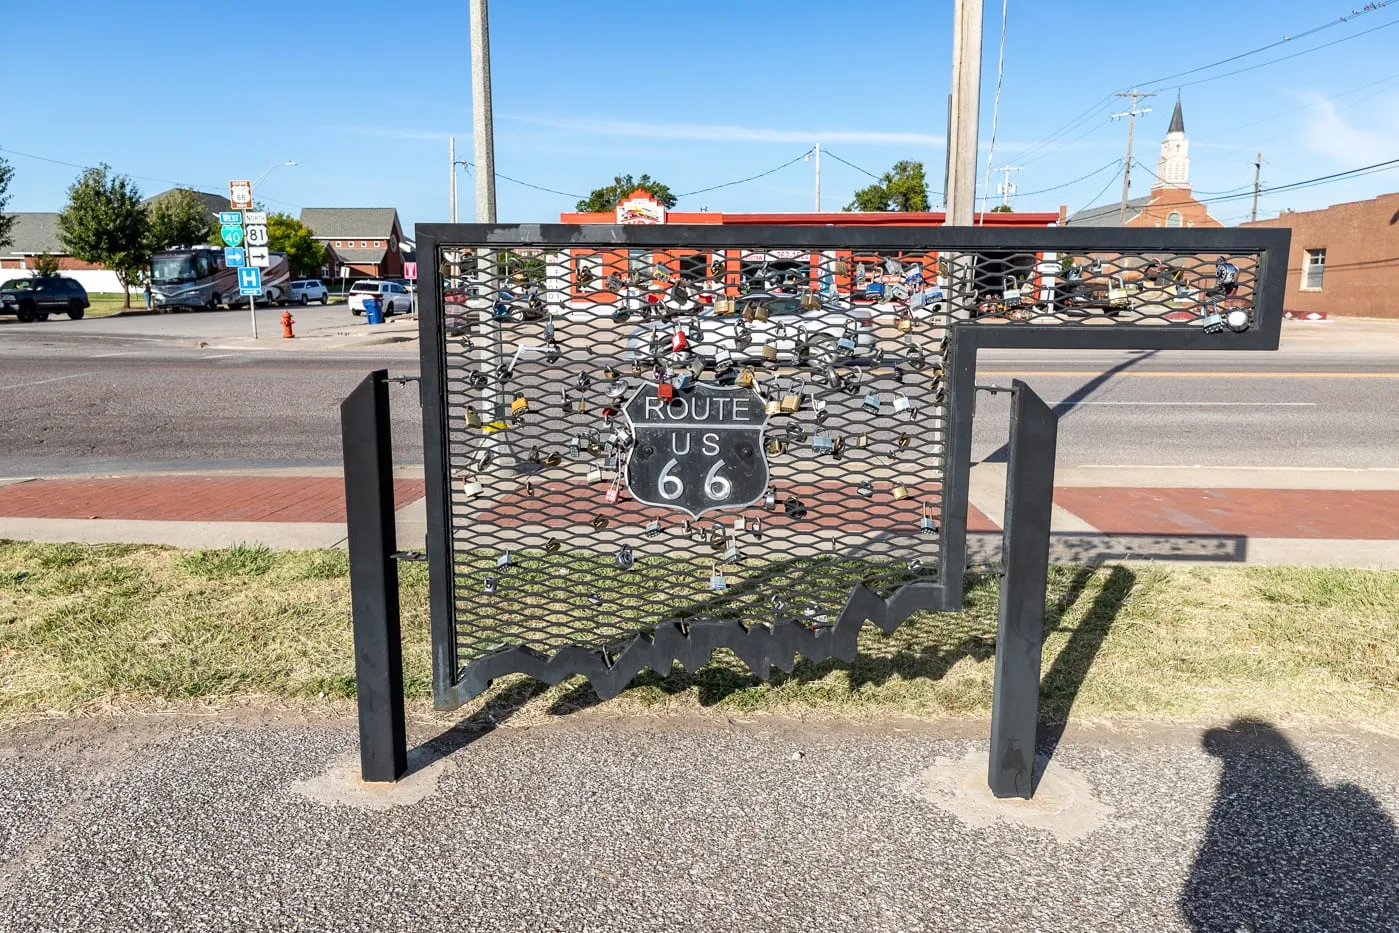 Love Padlock display at El Reno Mother Road Monument on Oklahoma Route 66 - Giant Route 66 shield photo opportunity